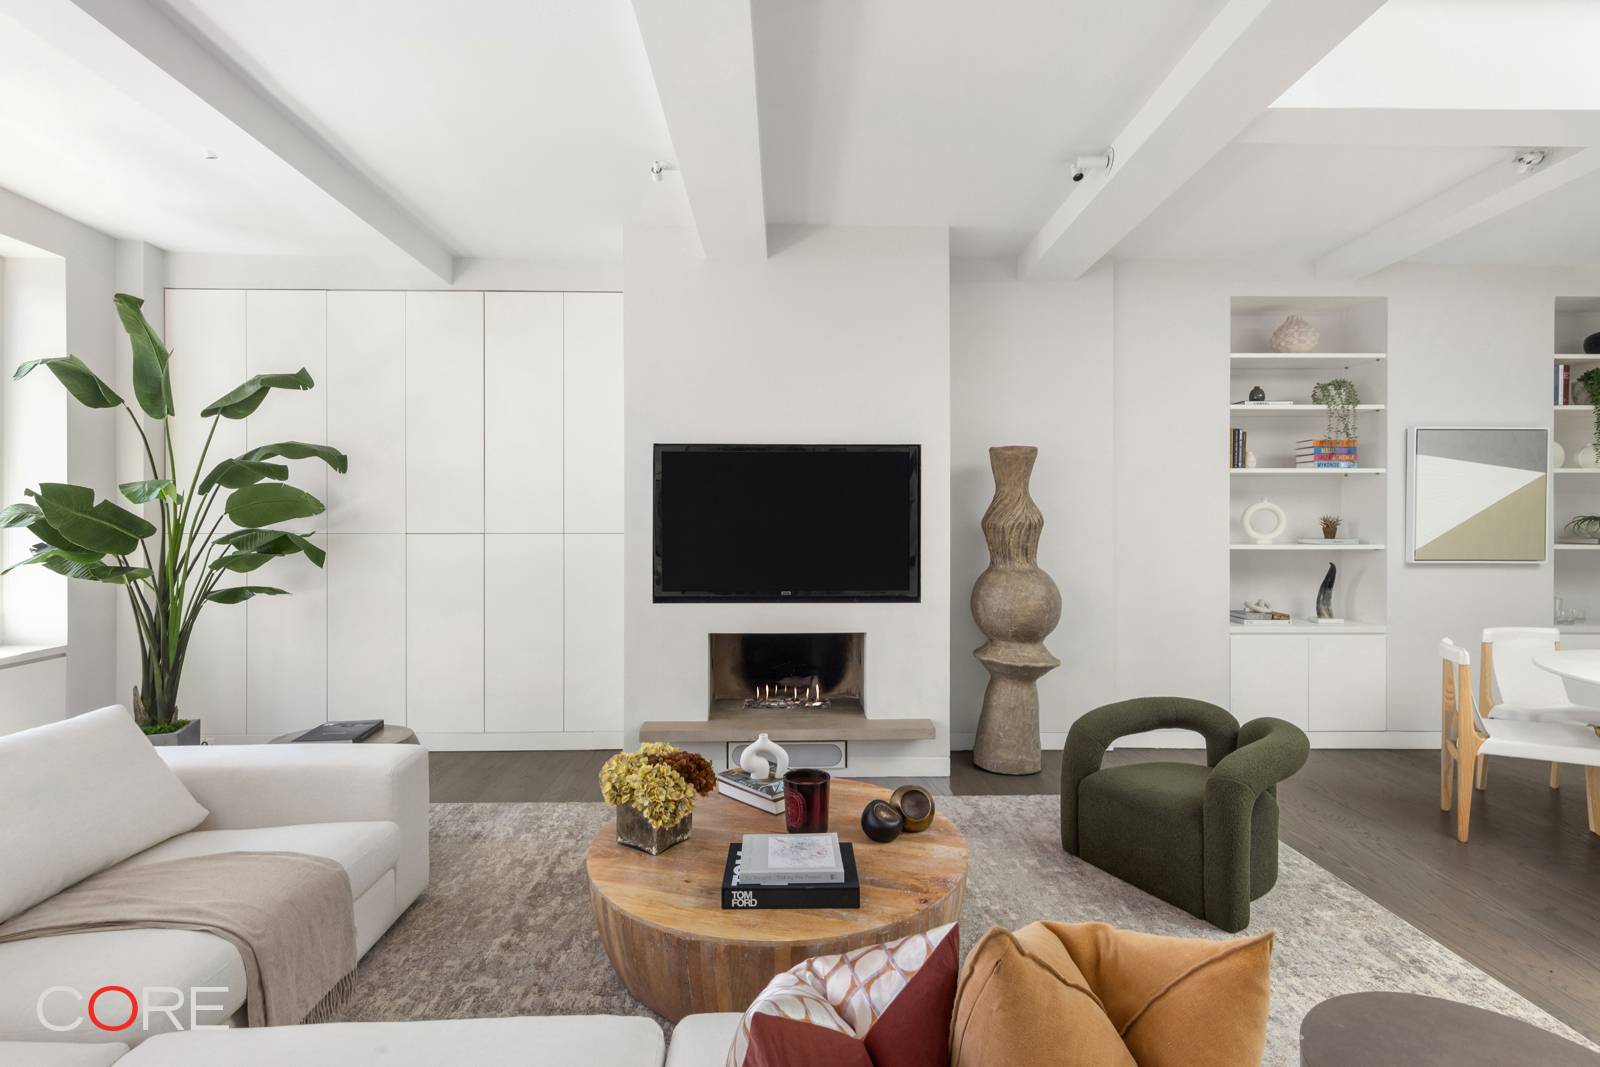 Meticulously designed by Messana O Rorke Architects is this two bedroom, one and a half bathroom home, located on the Gold Coast of Greenwich Village.